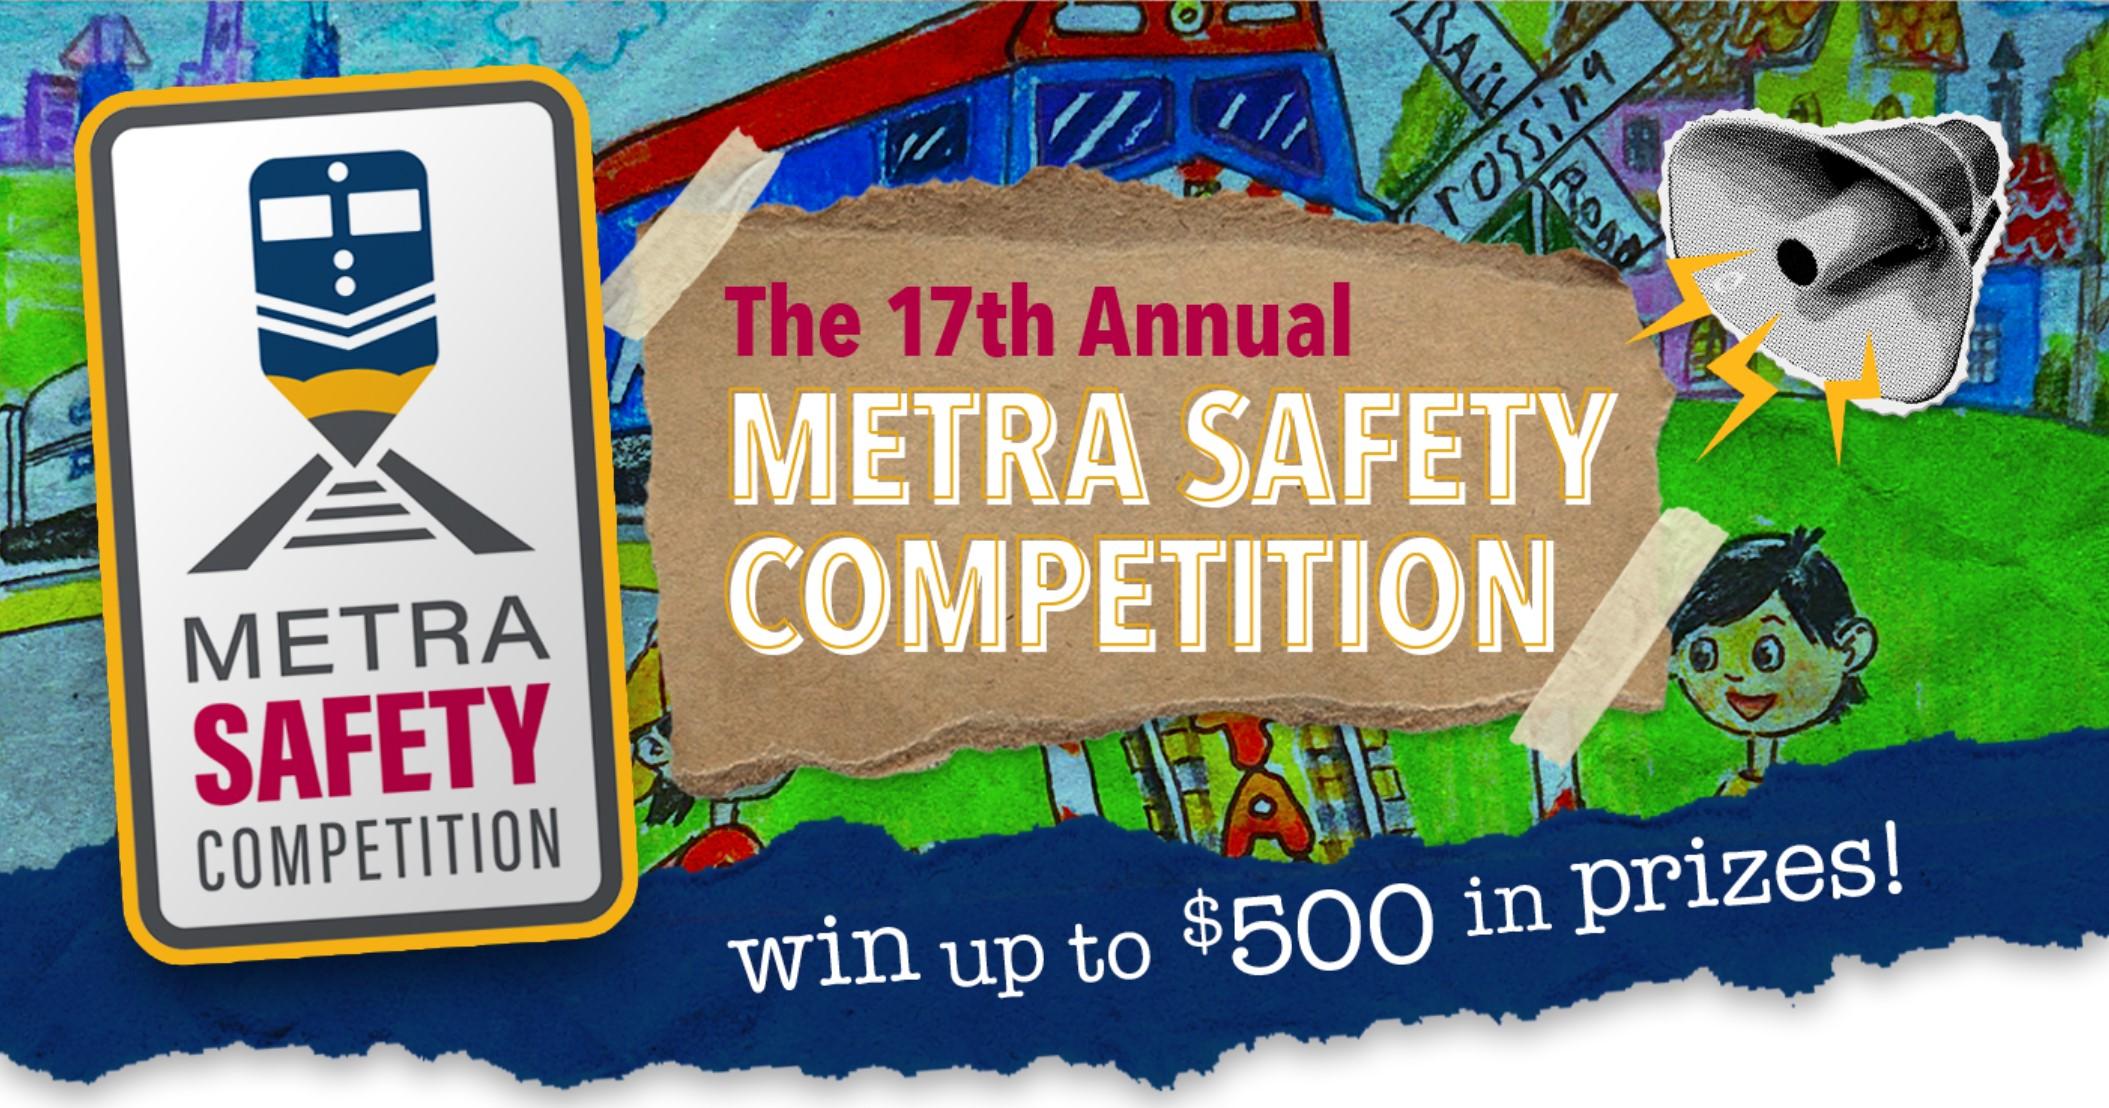 Students invited to participate in Metra’s annual Safety Competition